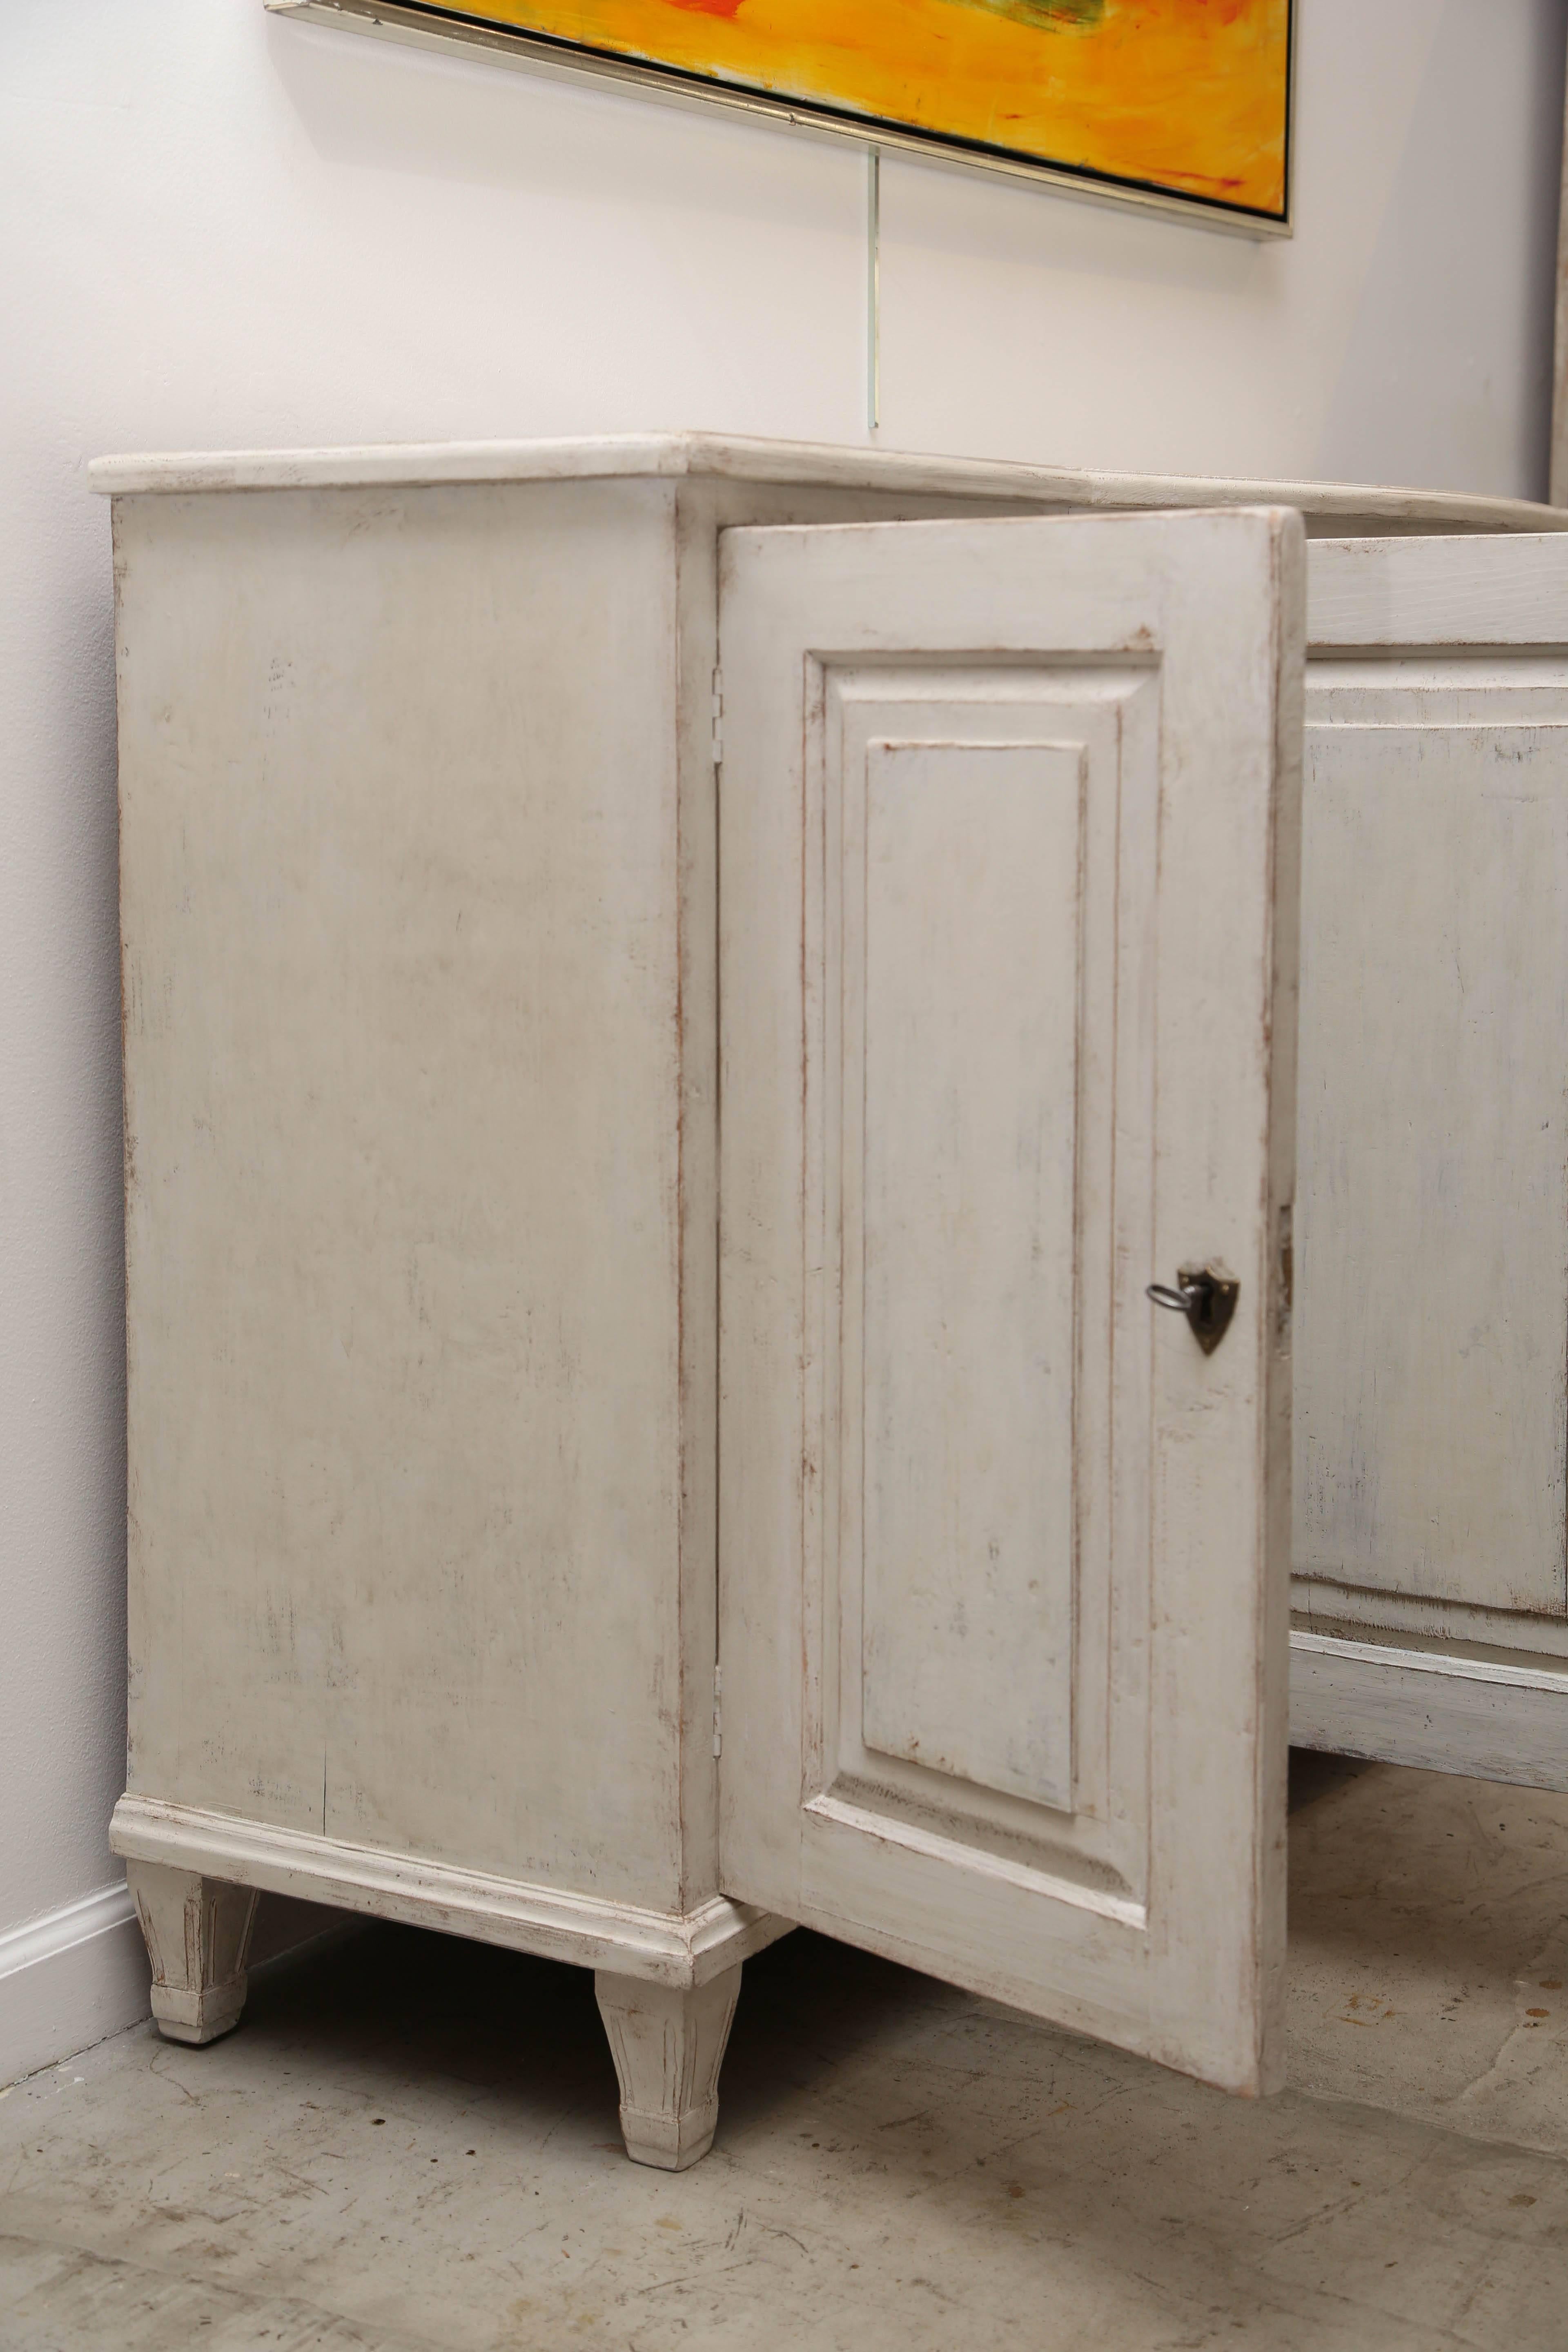 Unusually large antique Swedish Gustavian style painted bowed sideboard 19th century with four raised panel doors and seven small fluted legs. The centre doors are rounded with a rounded edge top.

Refreshed in a white/ivory  distressed Gustavian